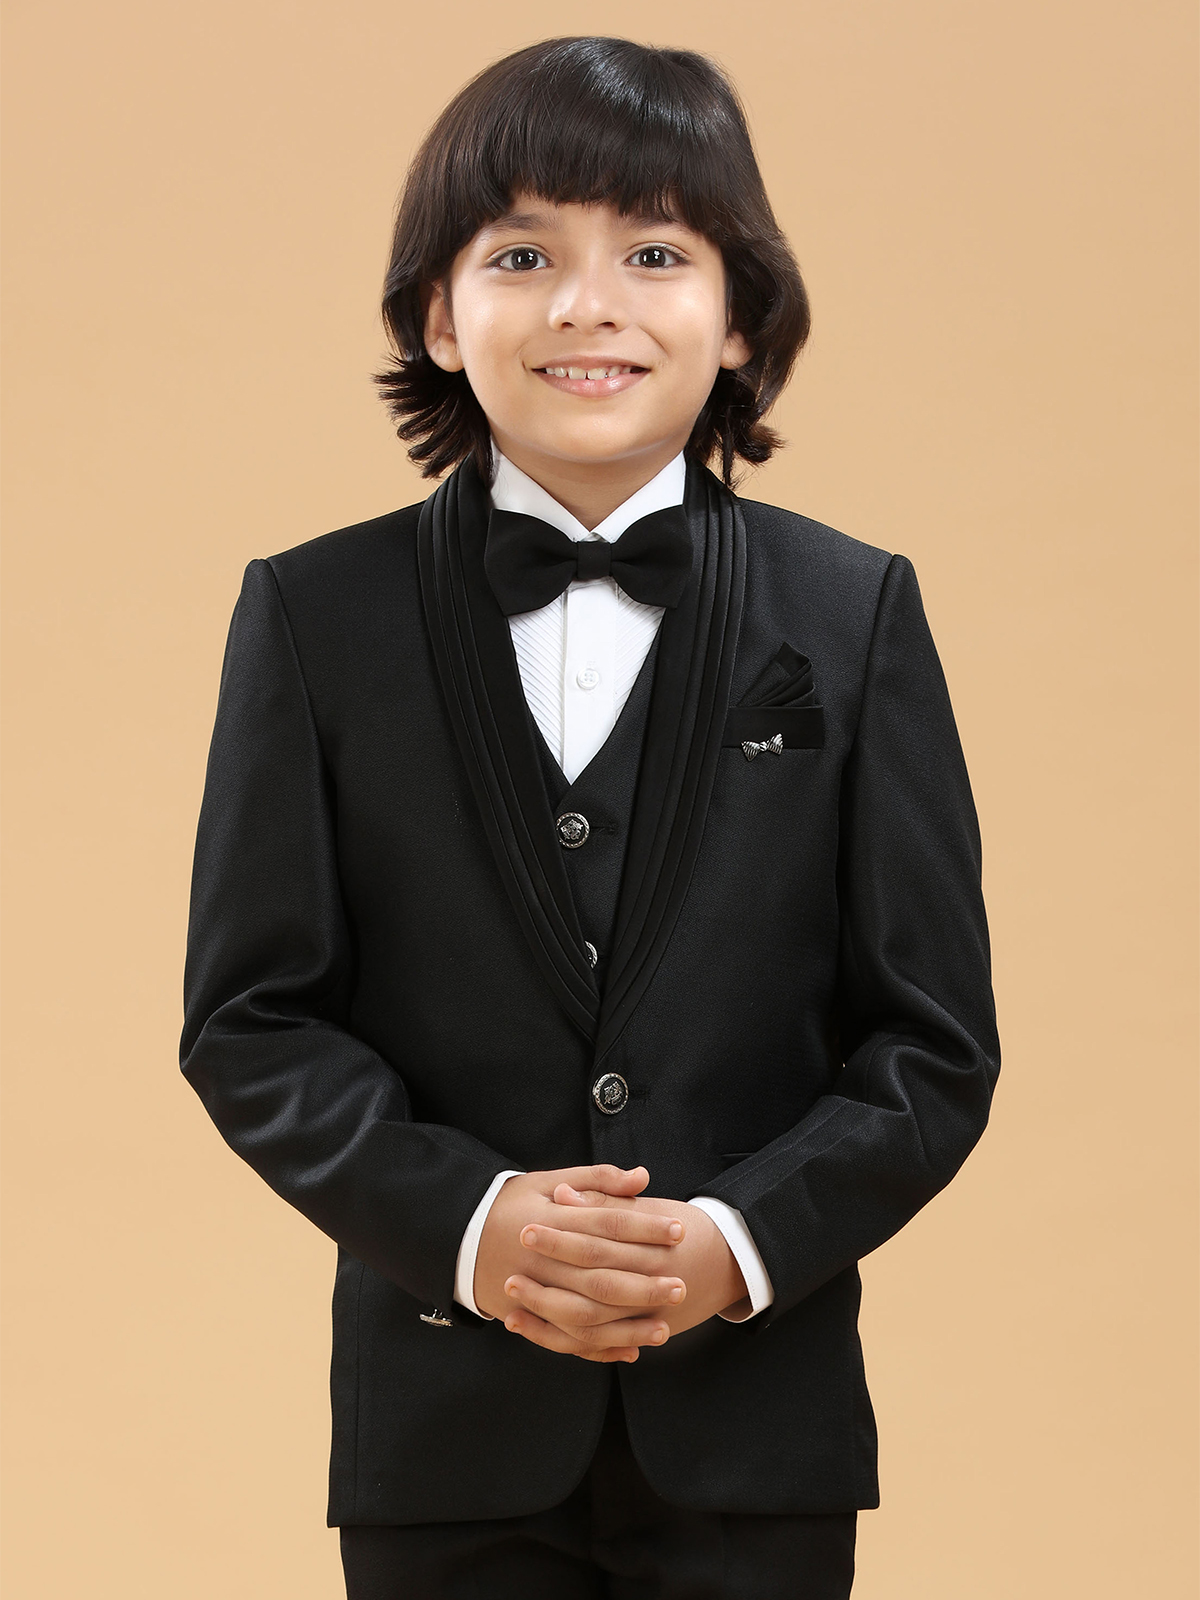 Boys Formal Black Designer Page Boy Wedding Prom Tailored Fit Funeral Suits  | eBay